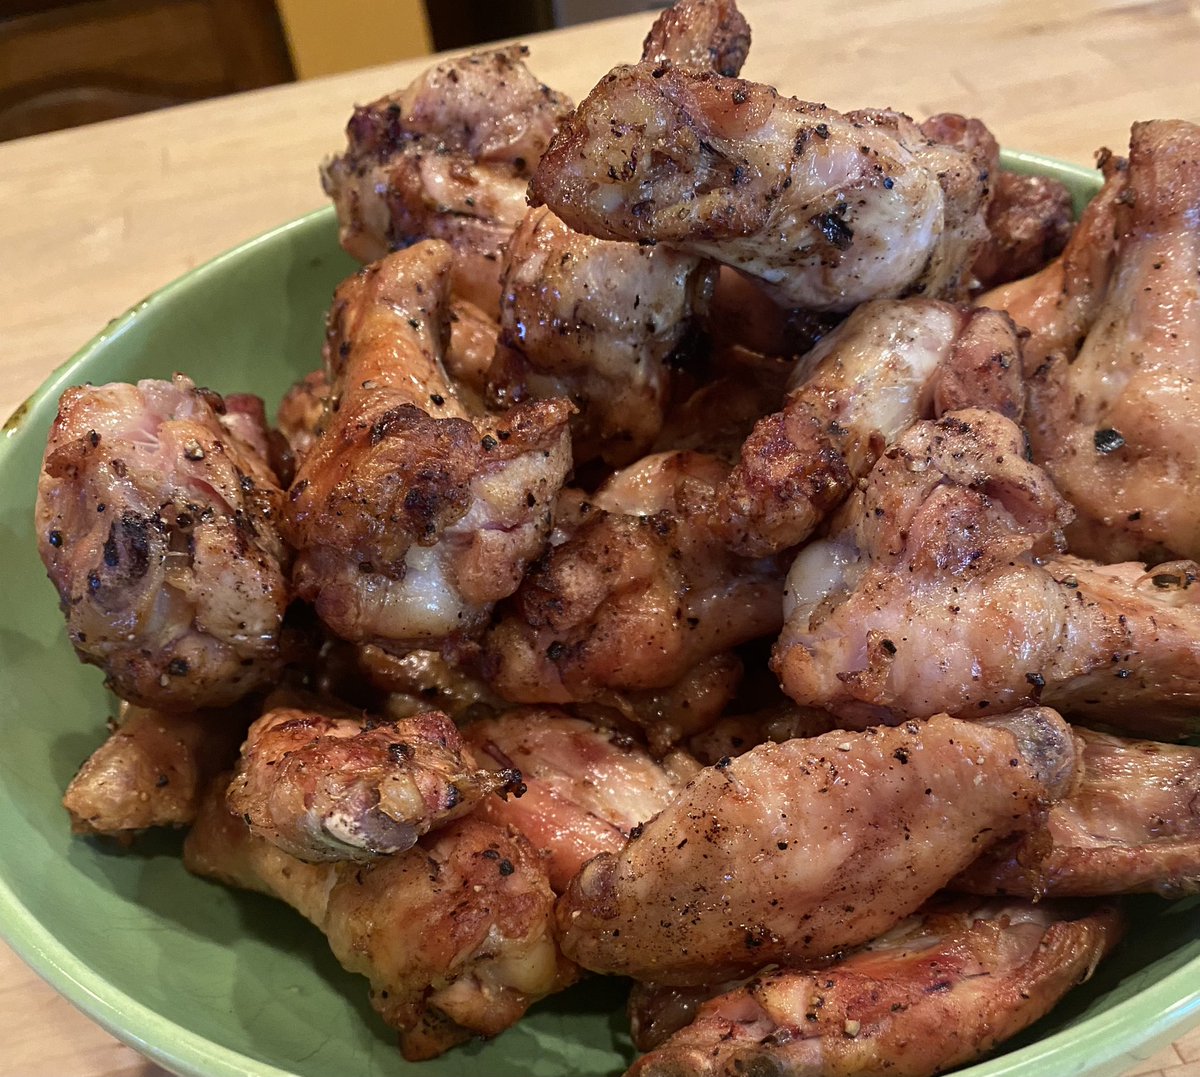 Grilled Salt and Pepper wings.
Franks red hot™️ not pictured. #yegfood